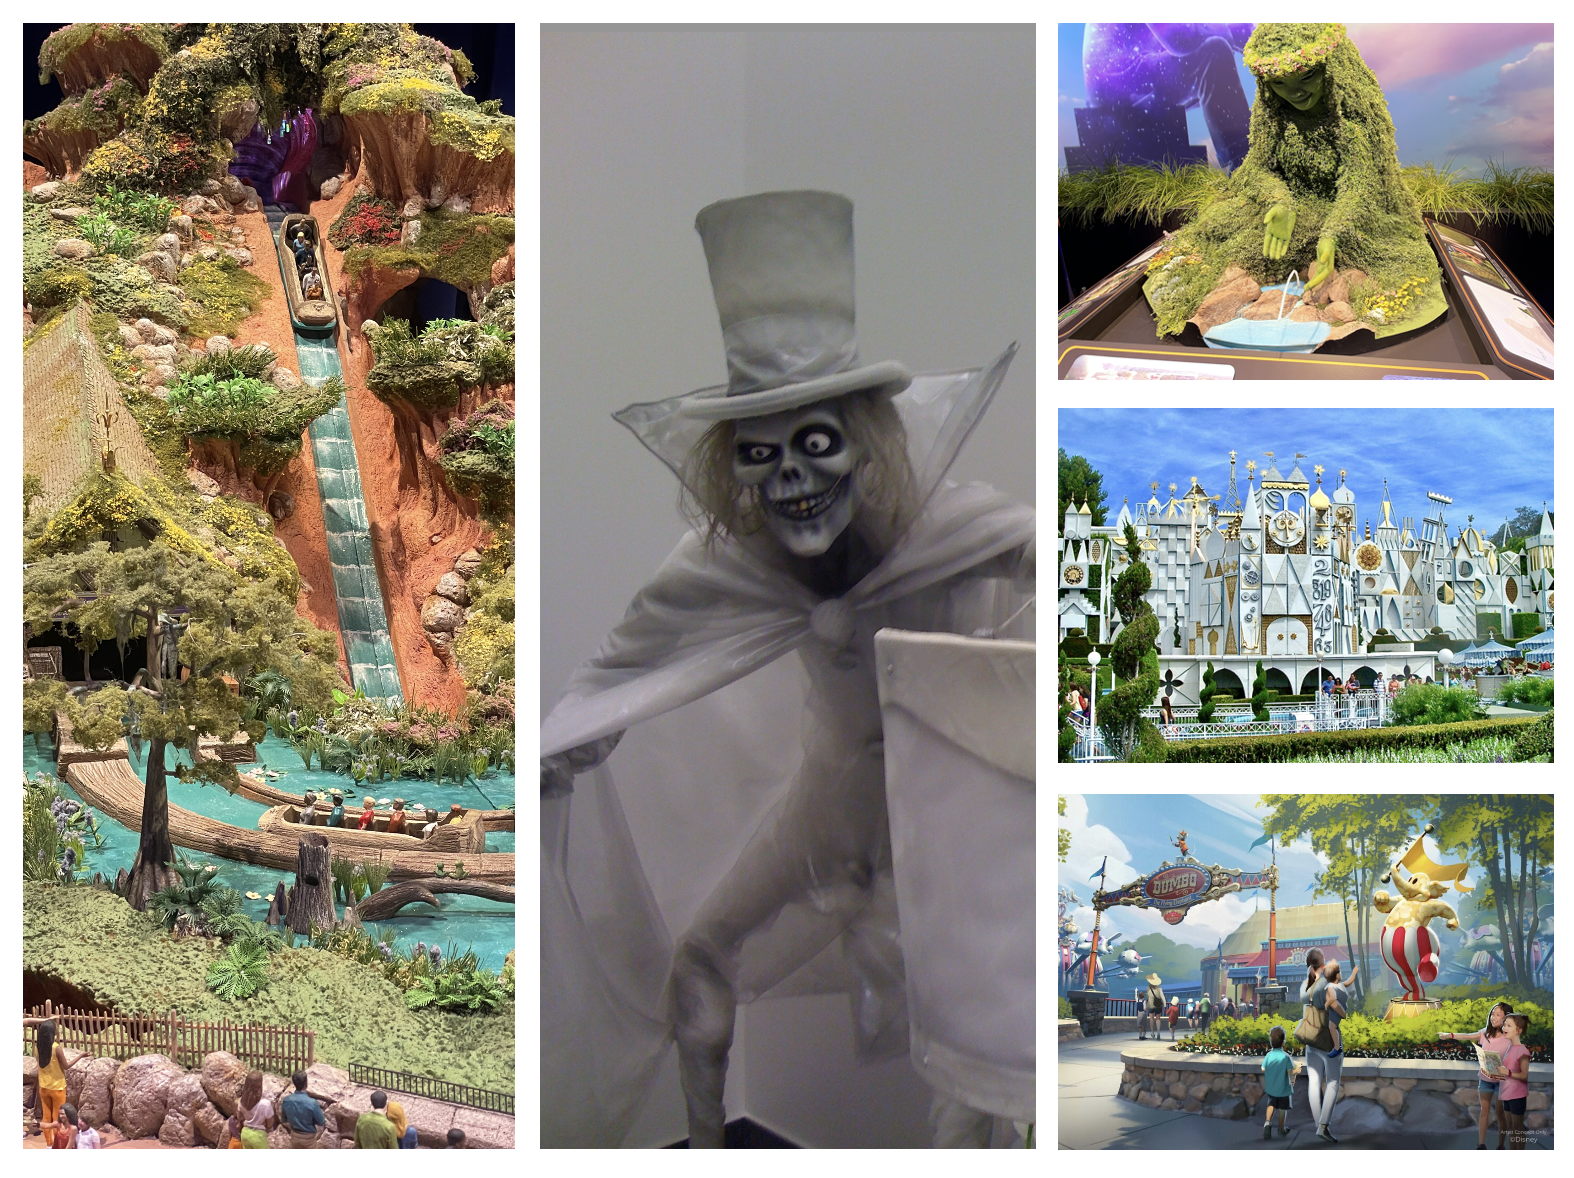 Hat Box Ghost & More–Can We Assume Positive Intent For Imagineering & In Life?